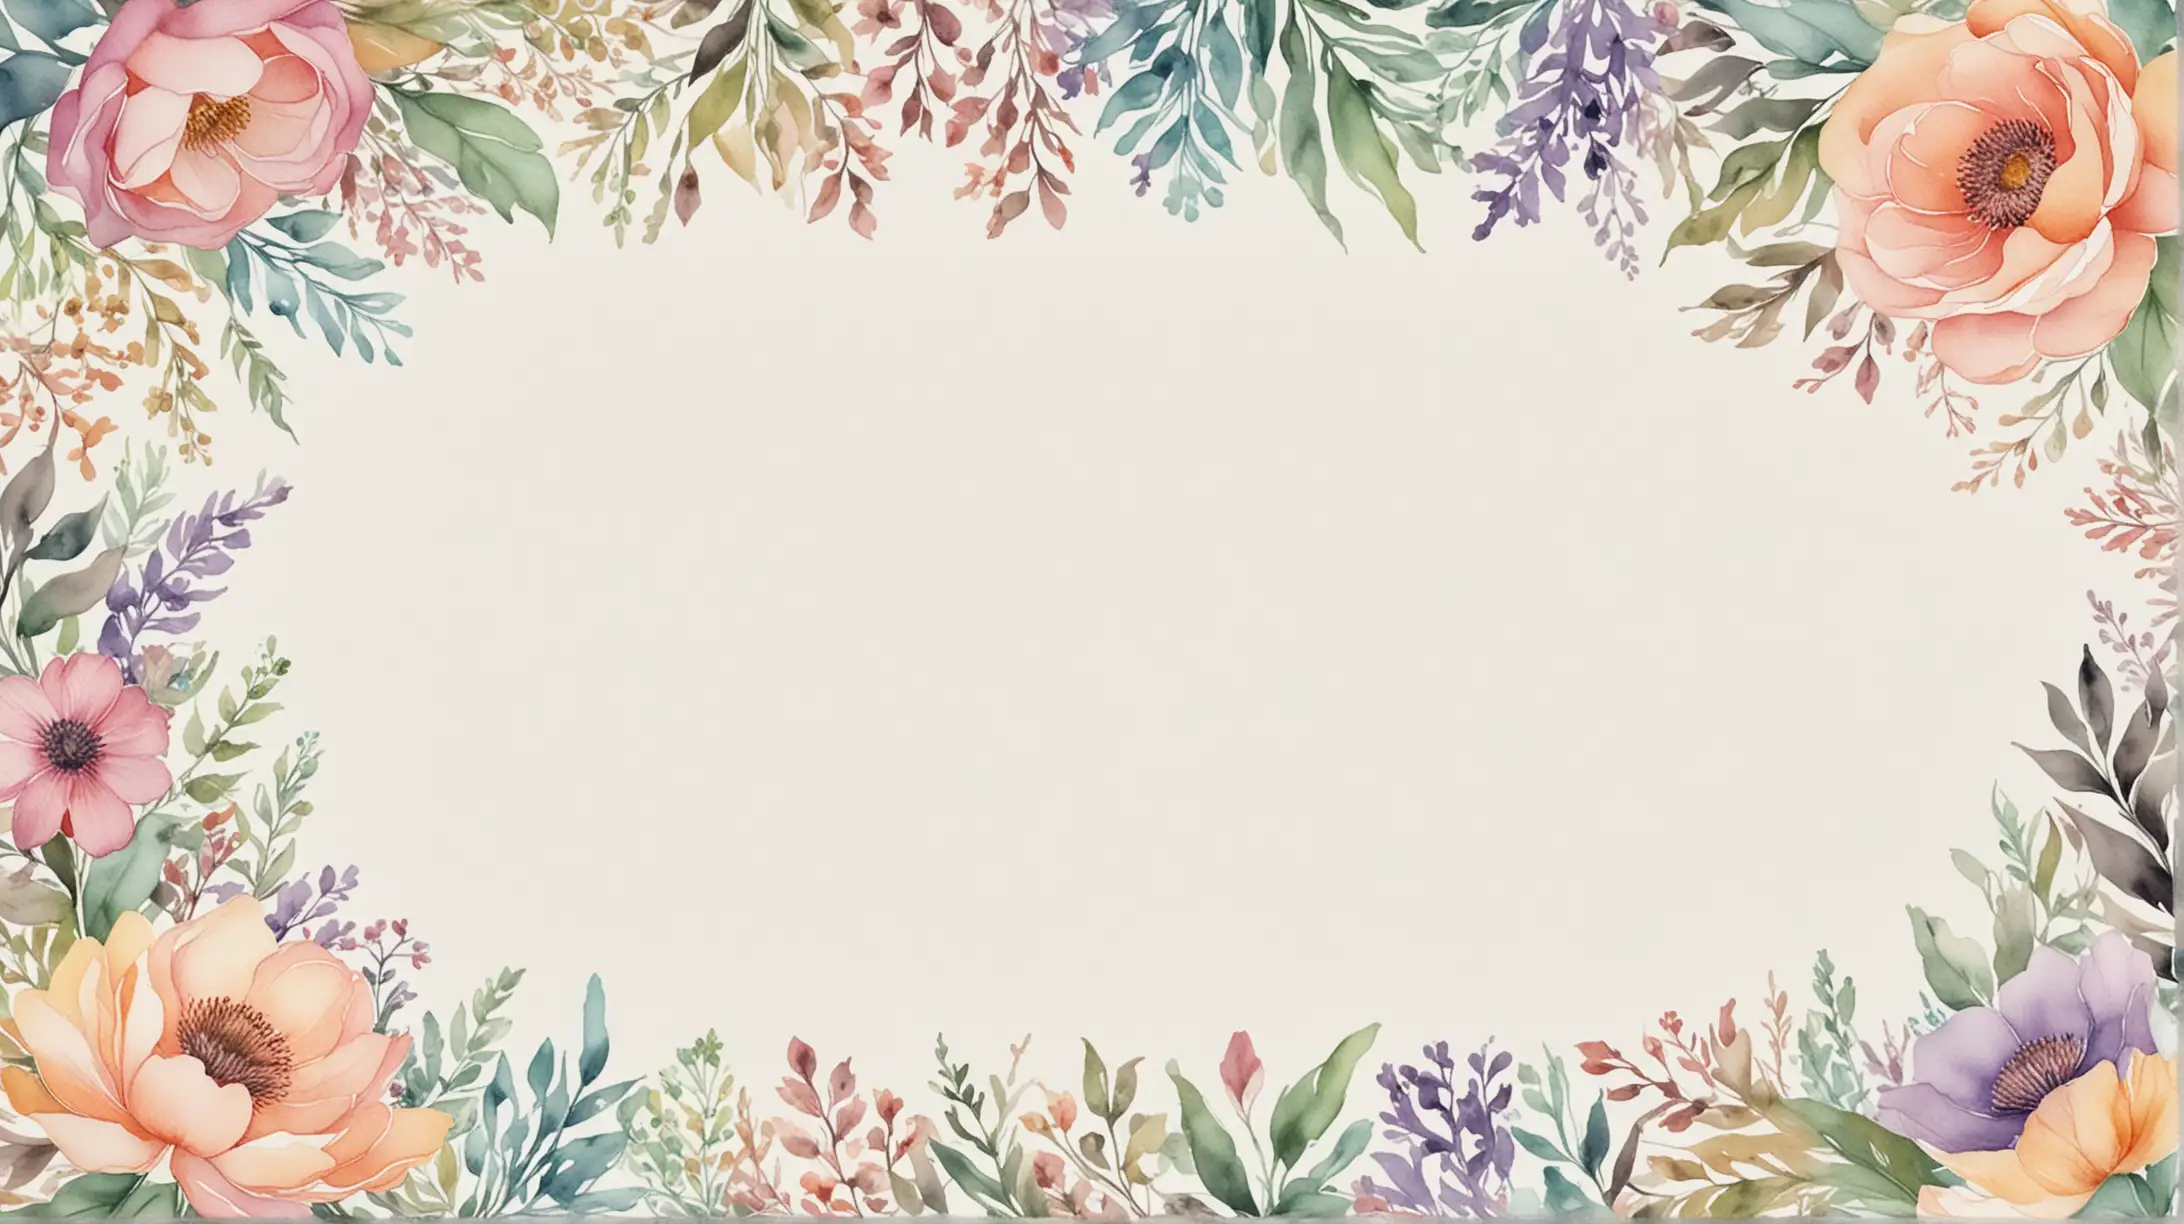 Whimsical Watercolor Floral Border on Blank White Page